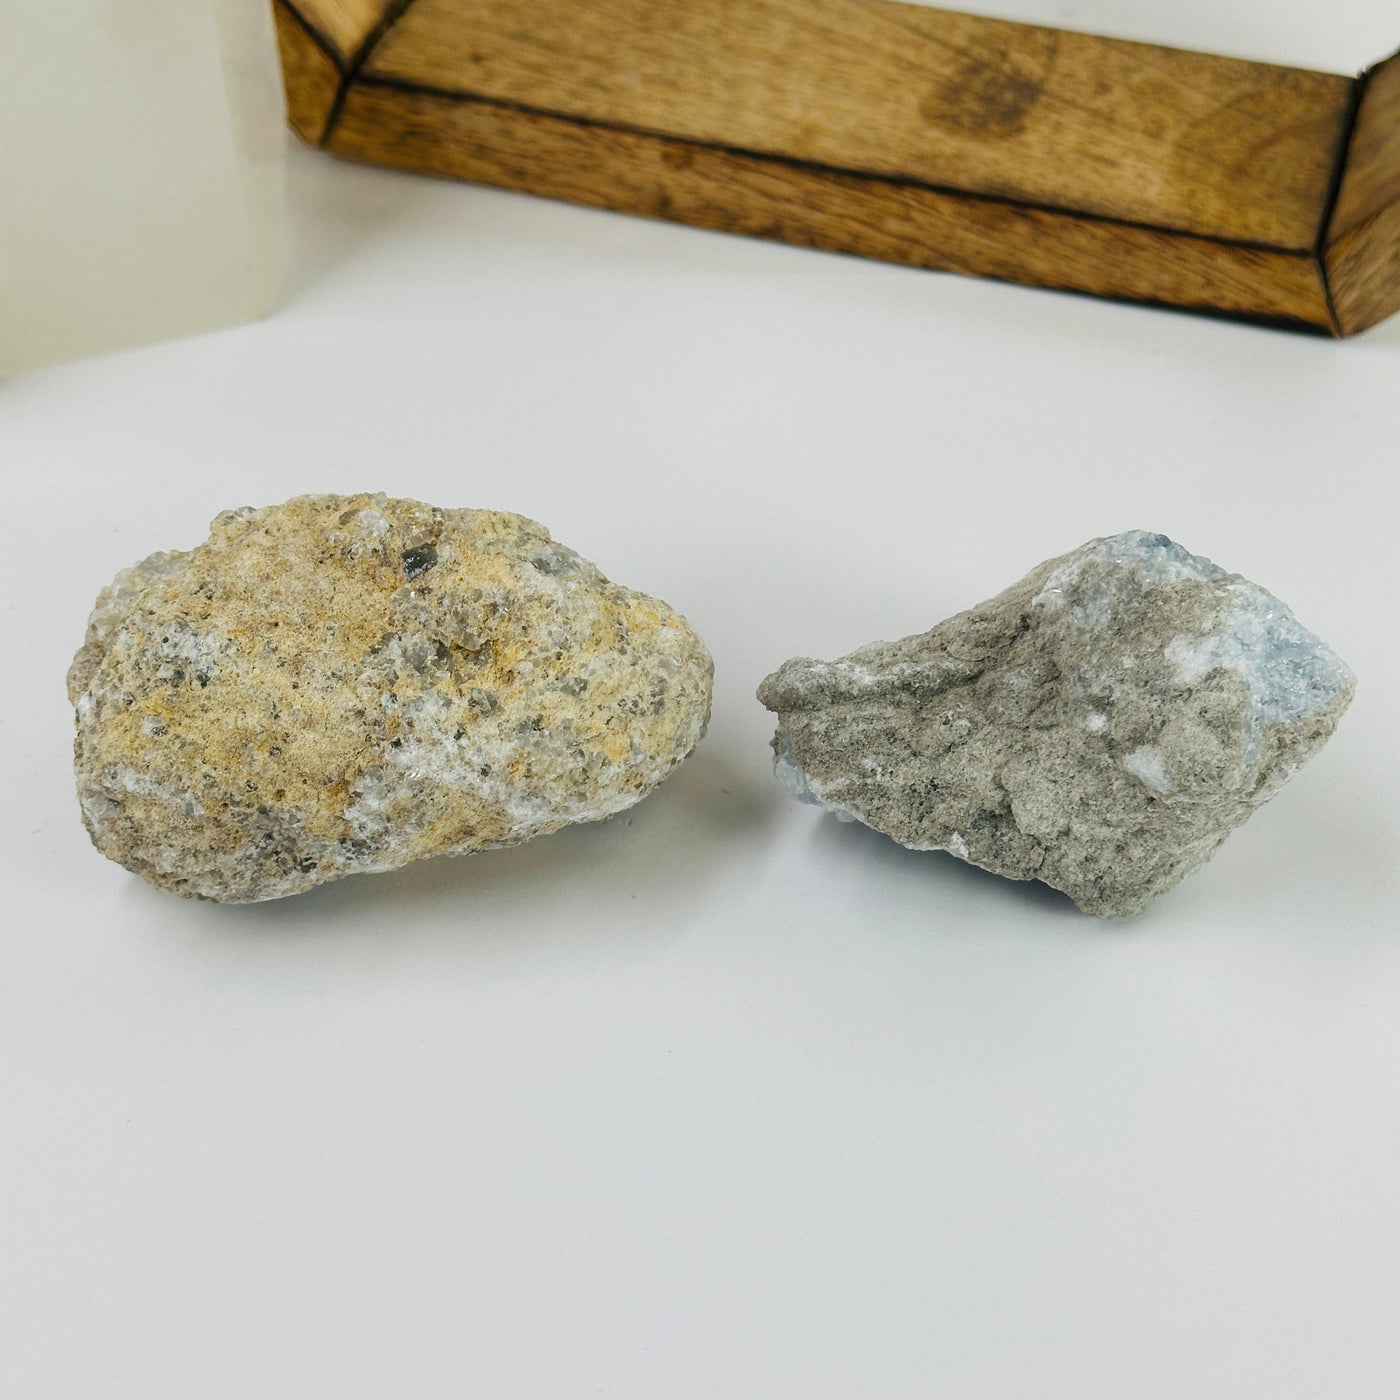 CELESTITE CLUSTERS with decorations in the background